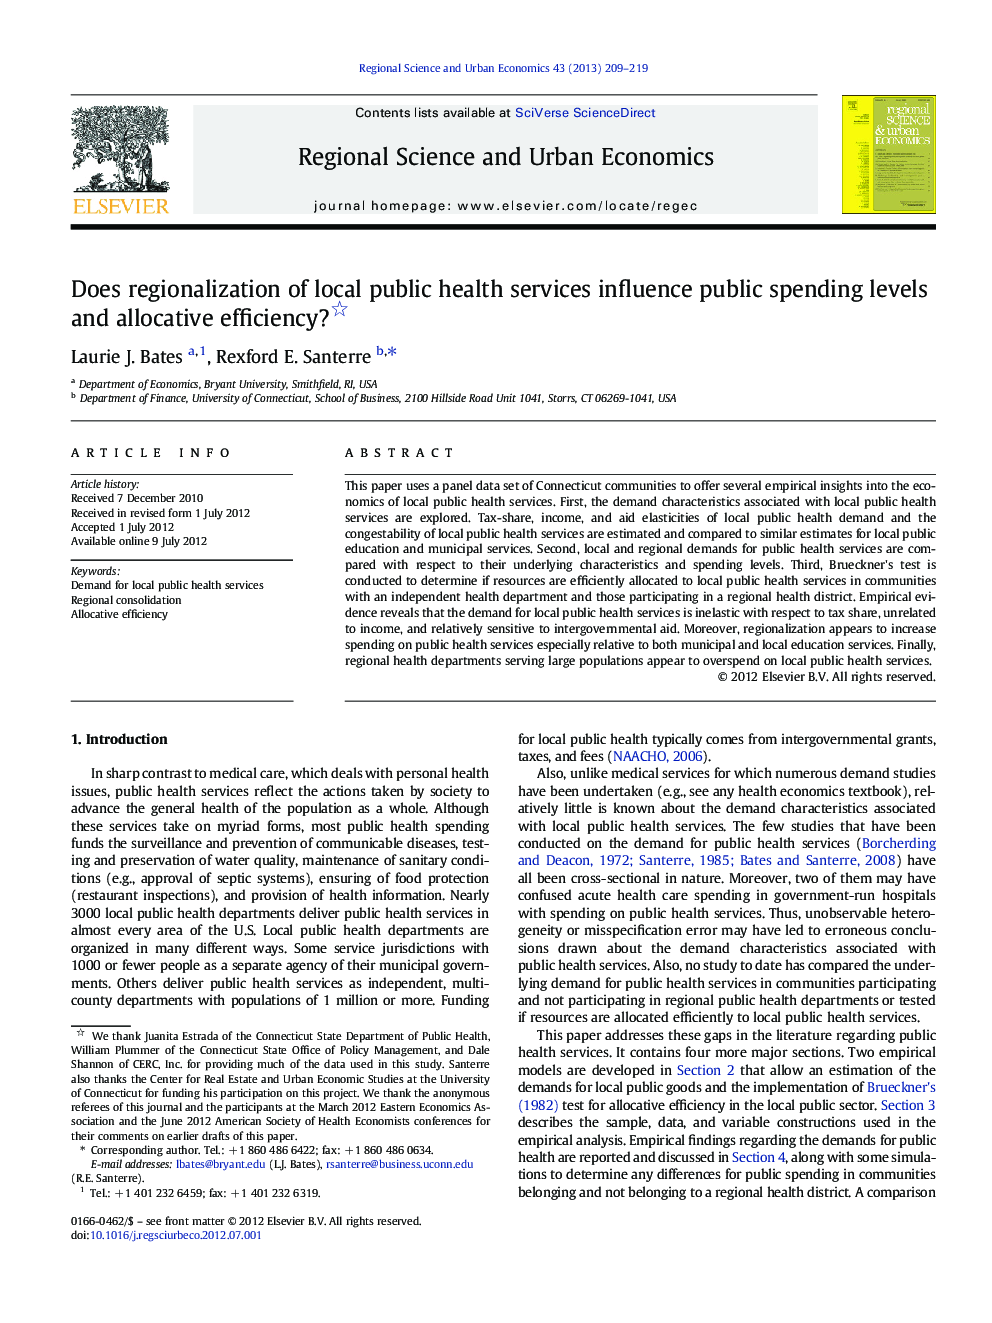 Does regionalization of local public health services influence public spending levels and allocative efficiency? 